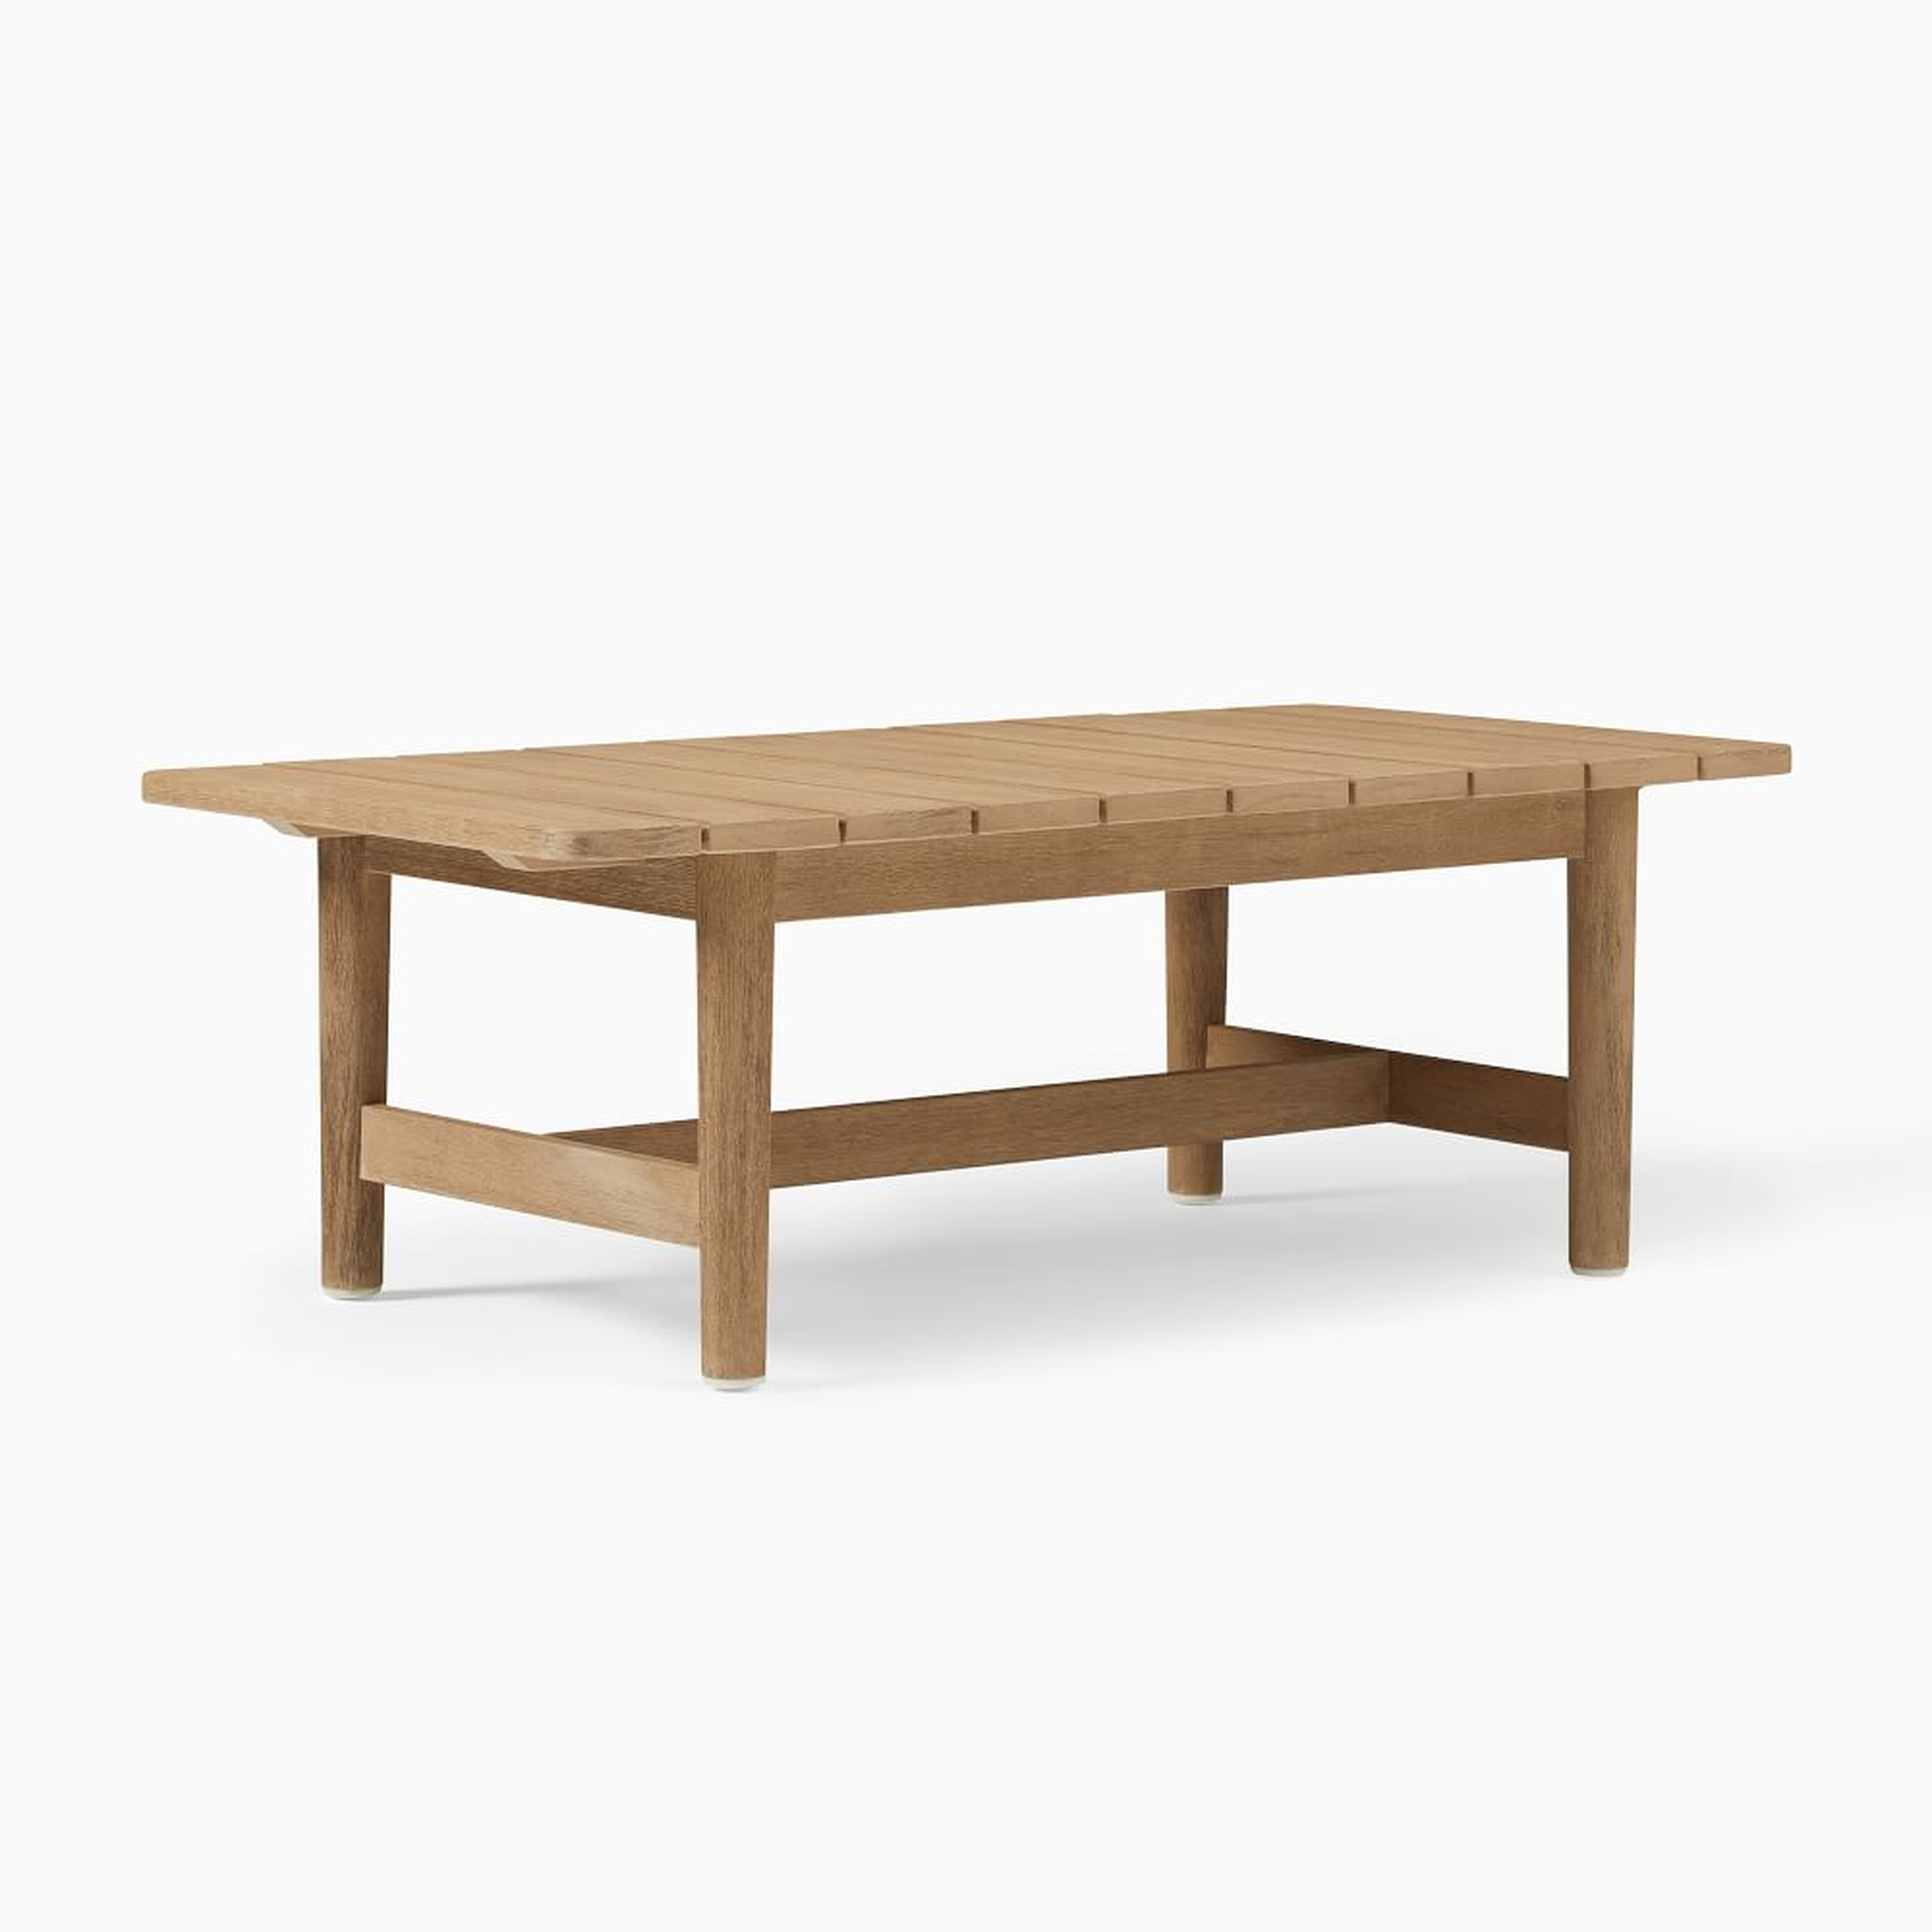 Hargrove Outdoor 49 in Rectangle Coffee Table, Reef - West Elm